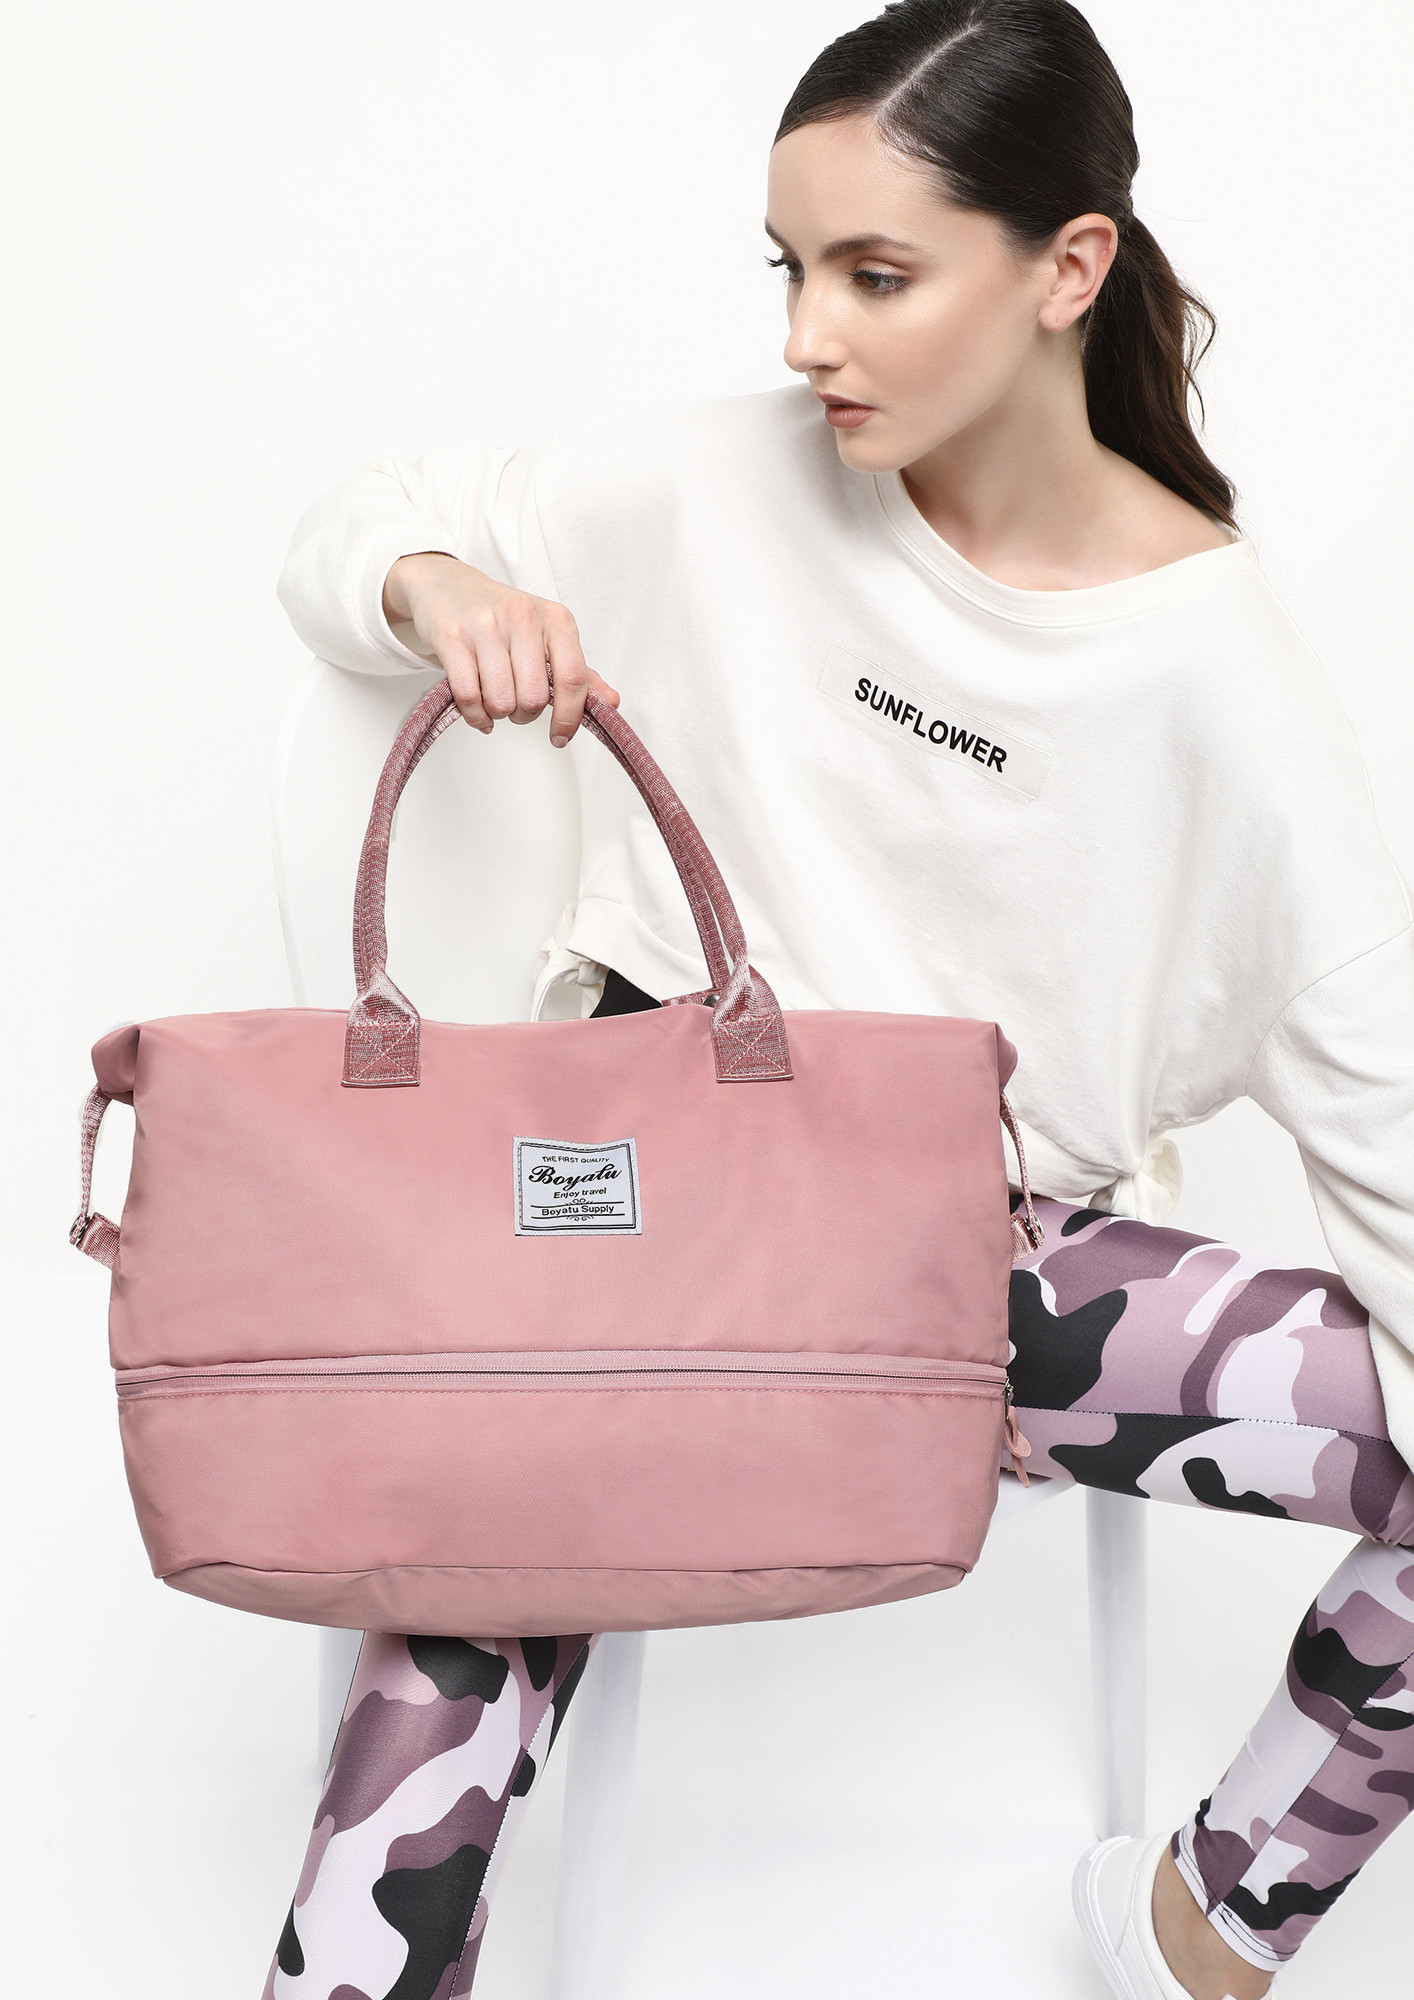 BORN TO TRAVEL PINK DUFFLE BAG